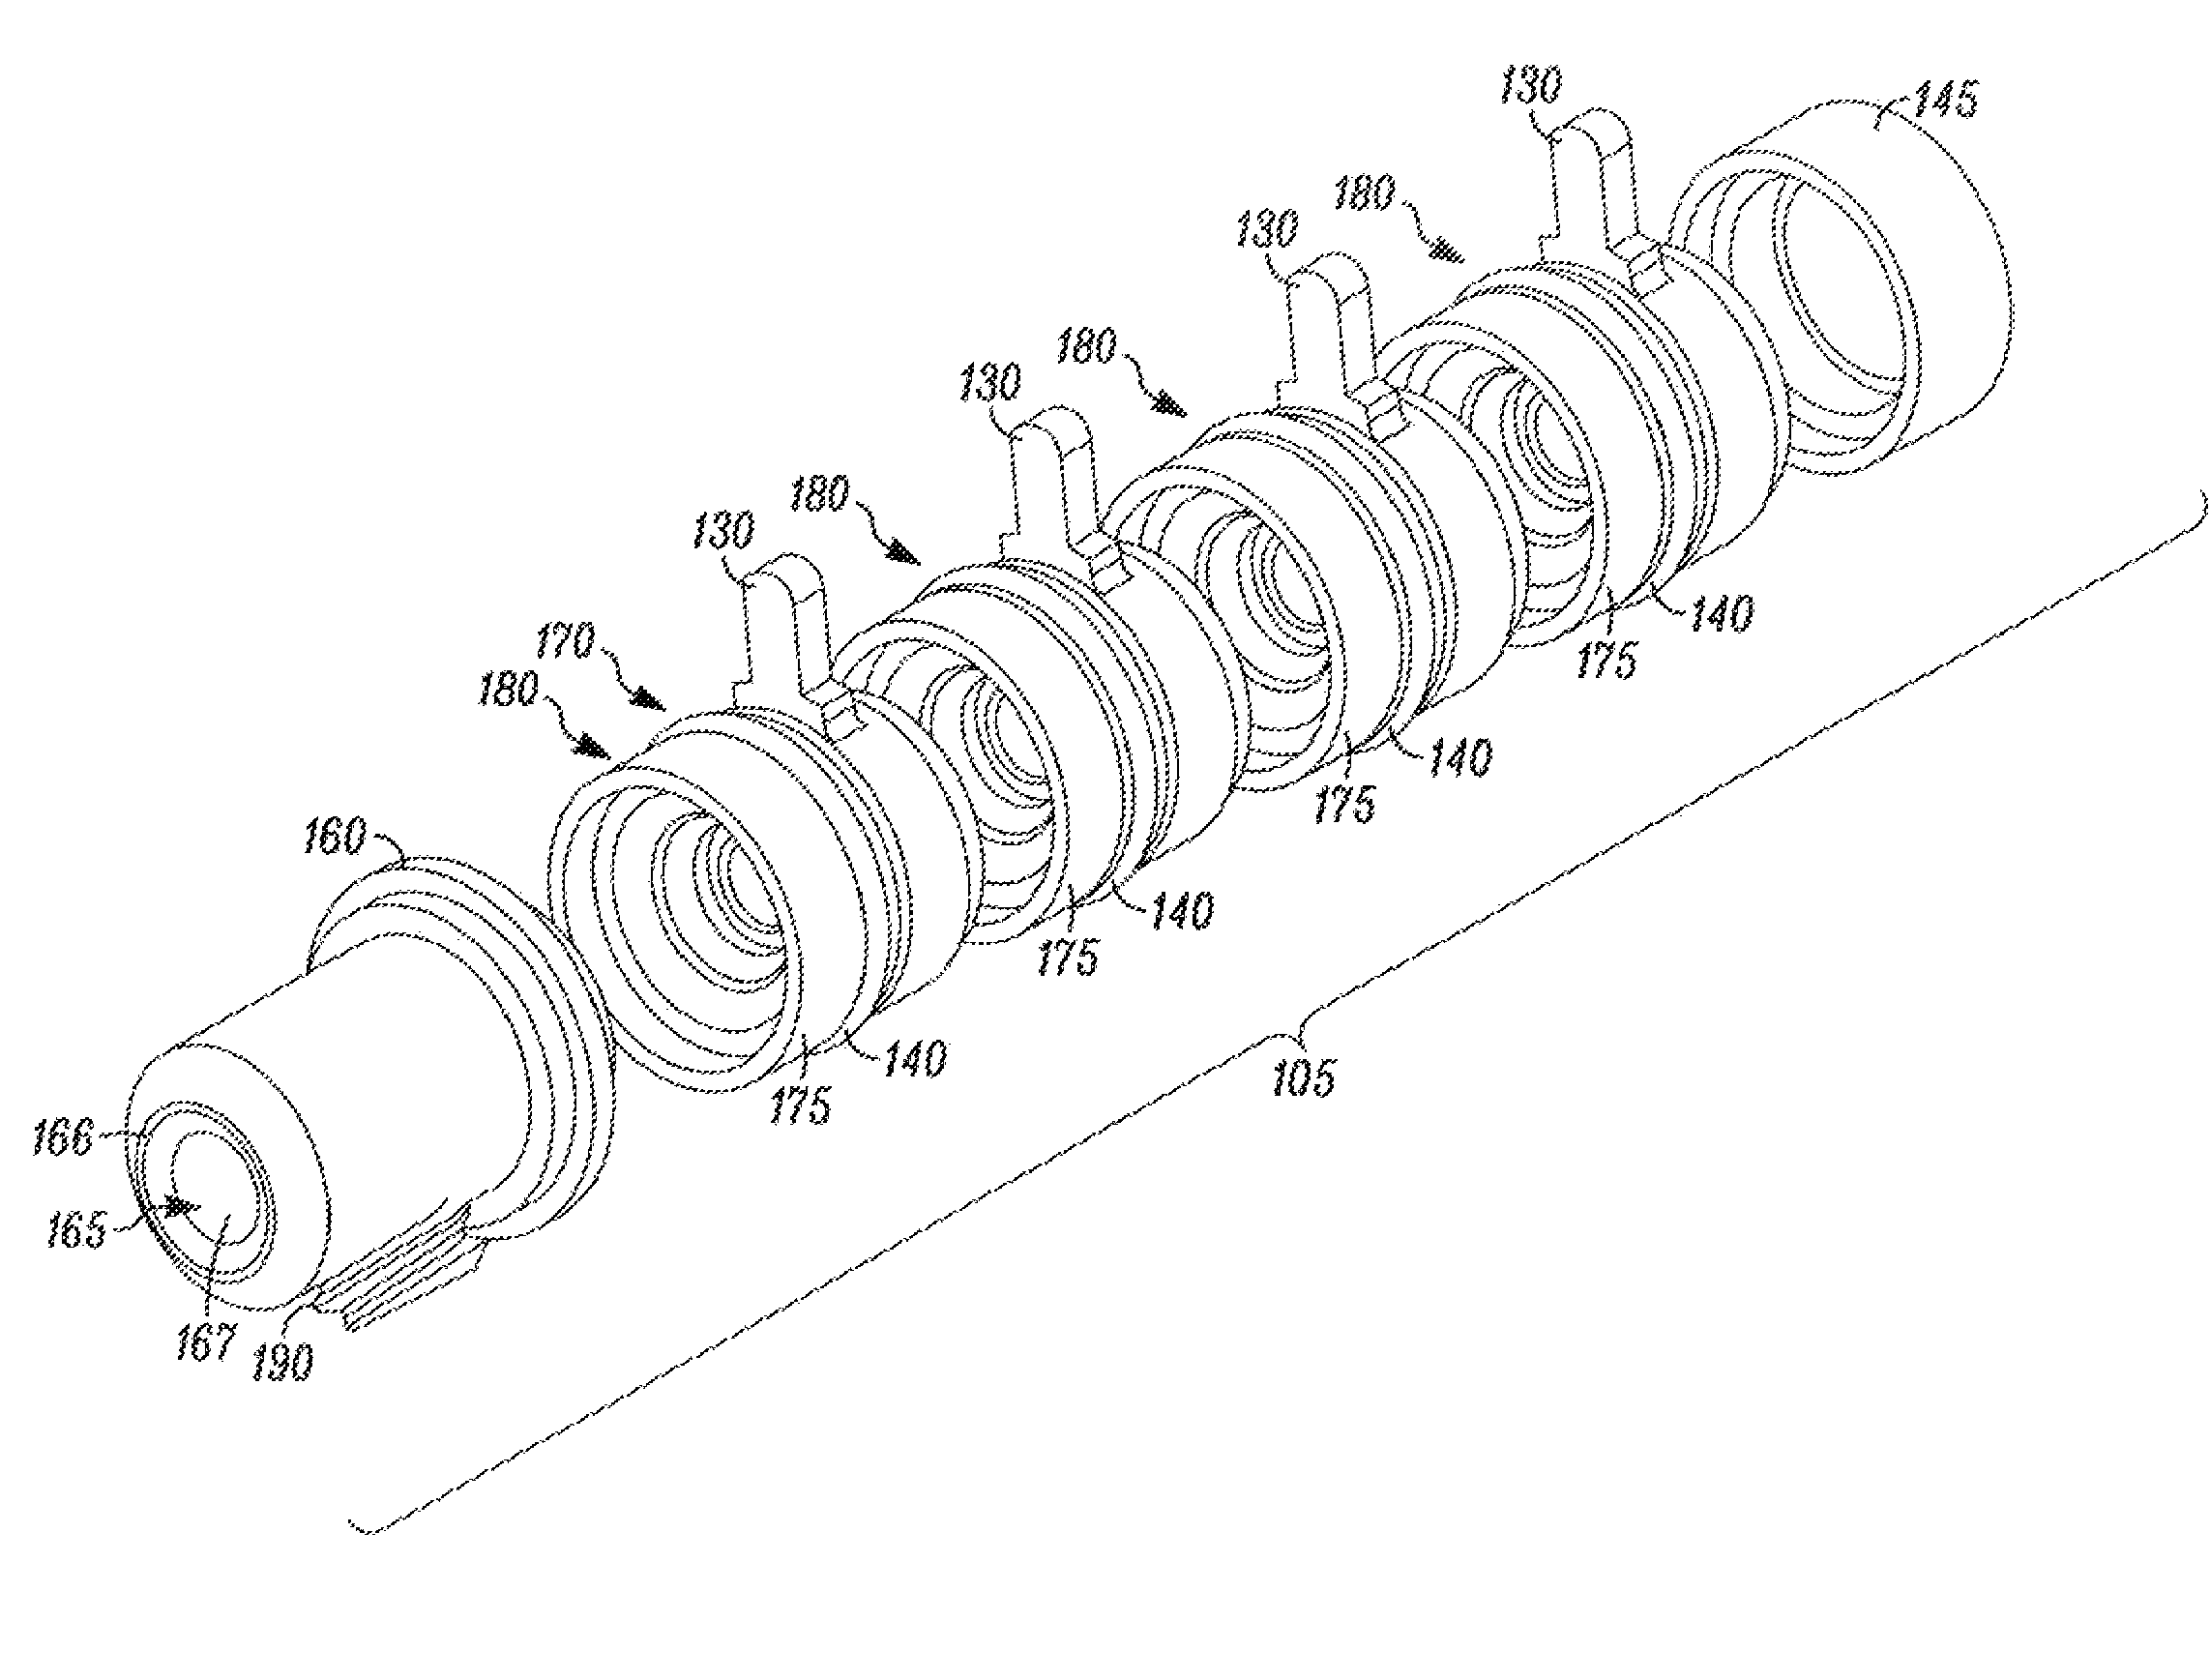 Internal hermetic lead connector for implantable device